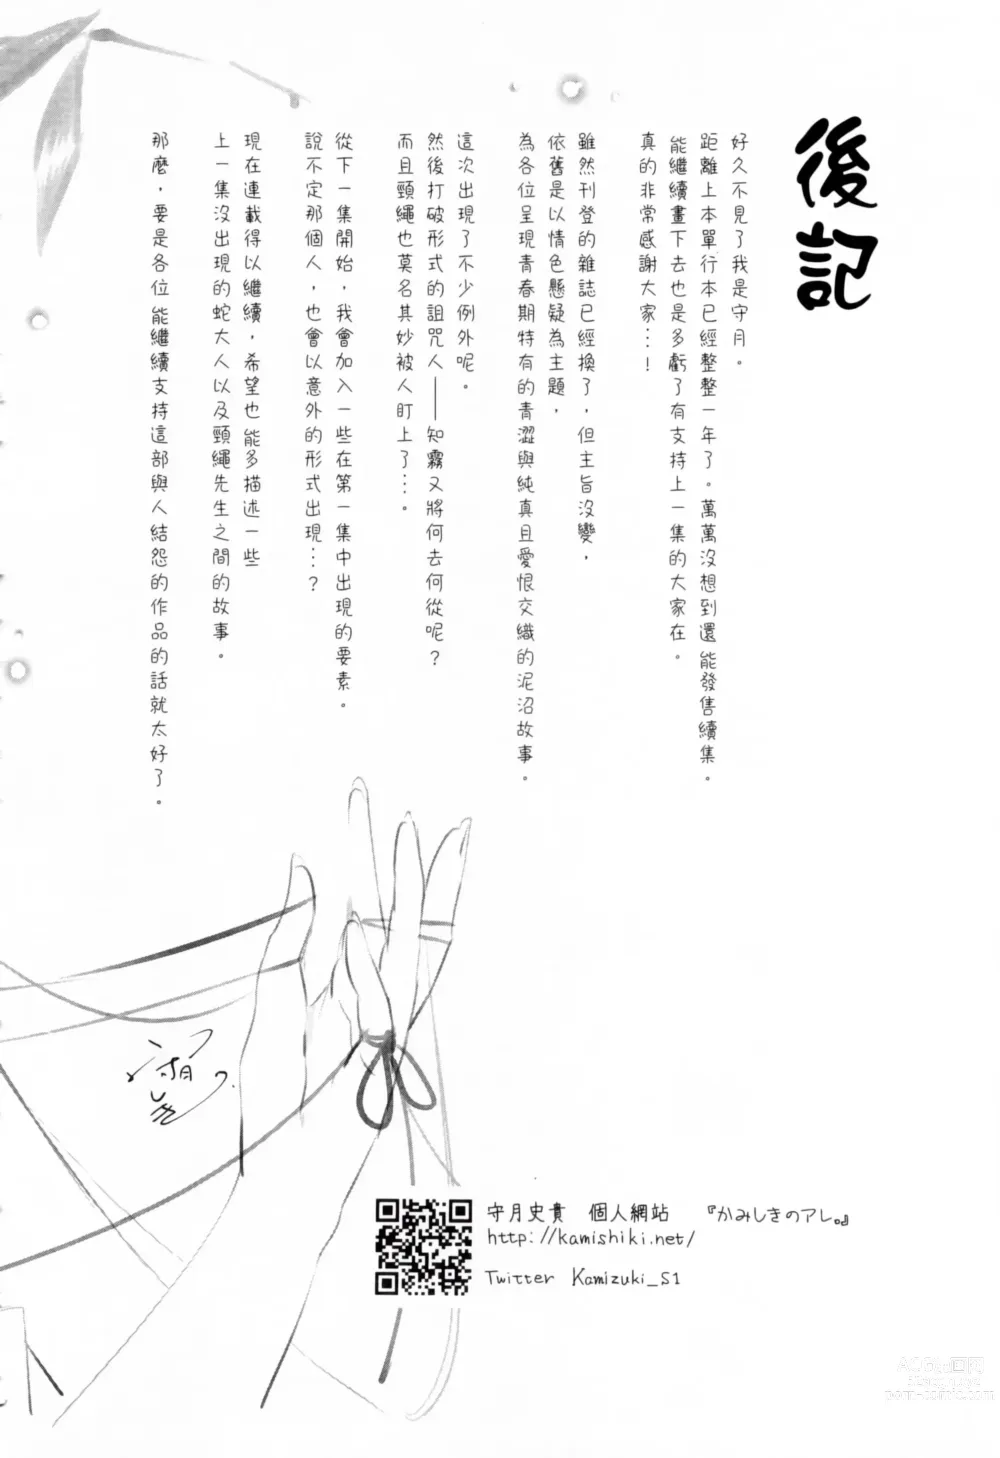 Page 190 of manga 神さまの怨結び 第2巻